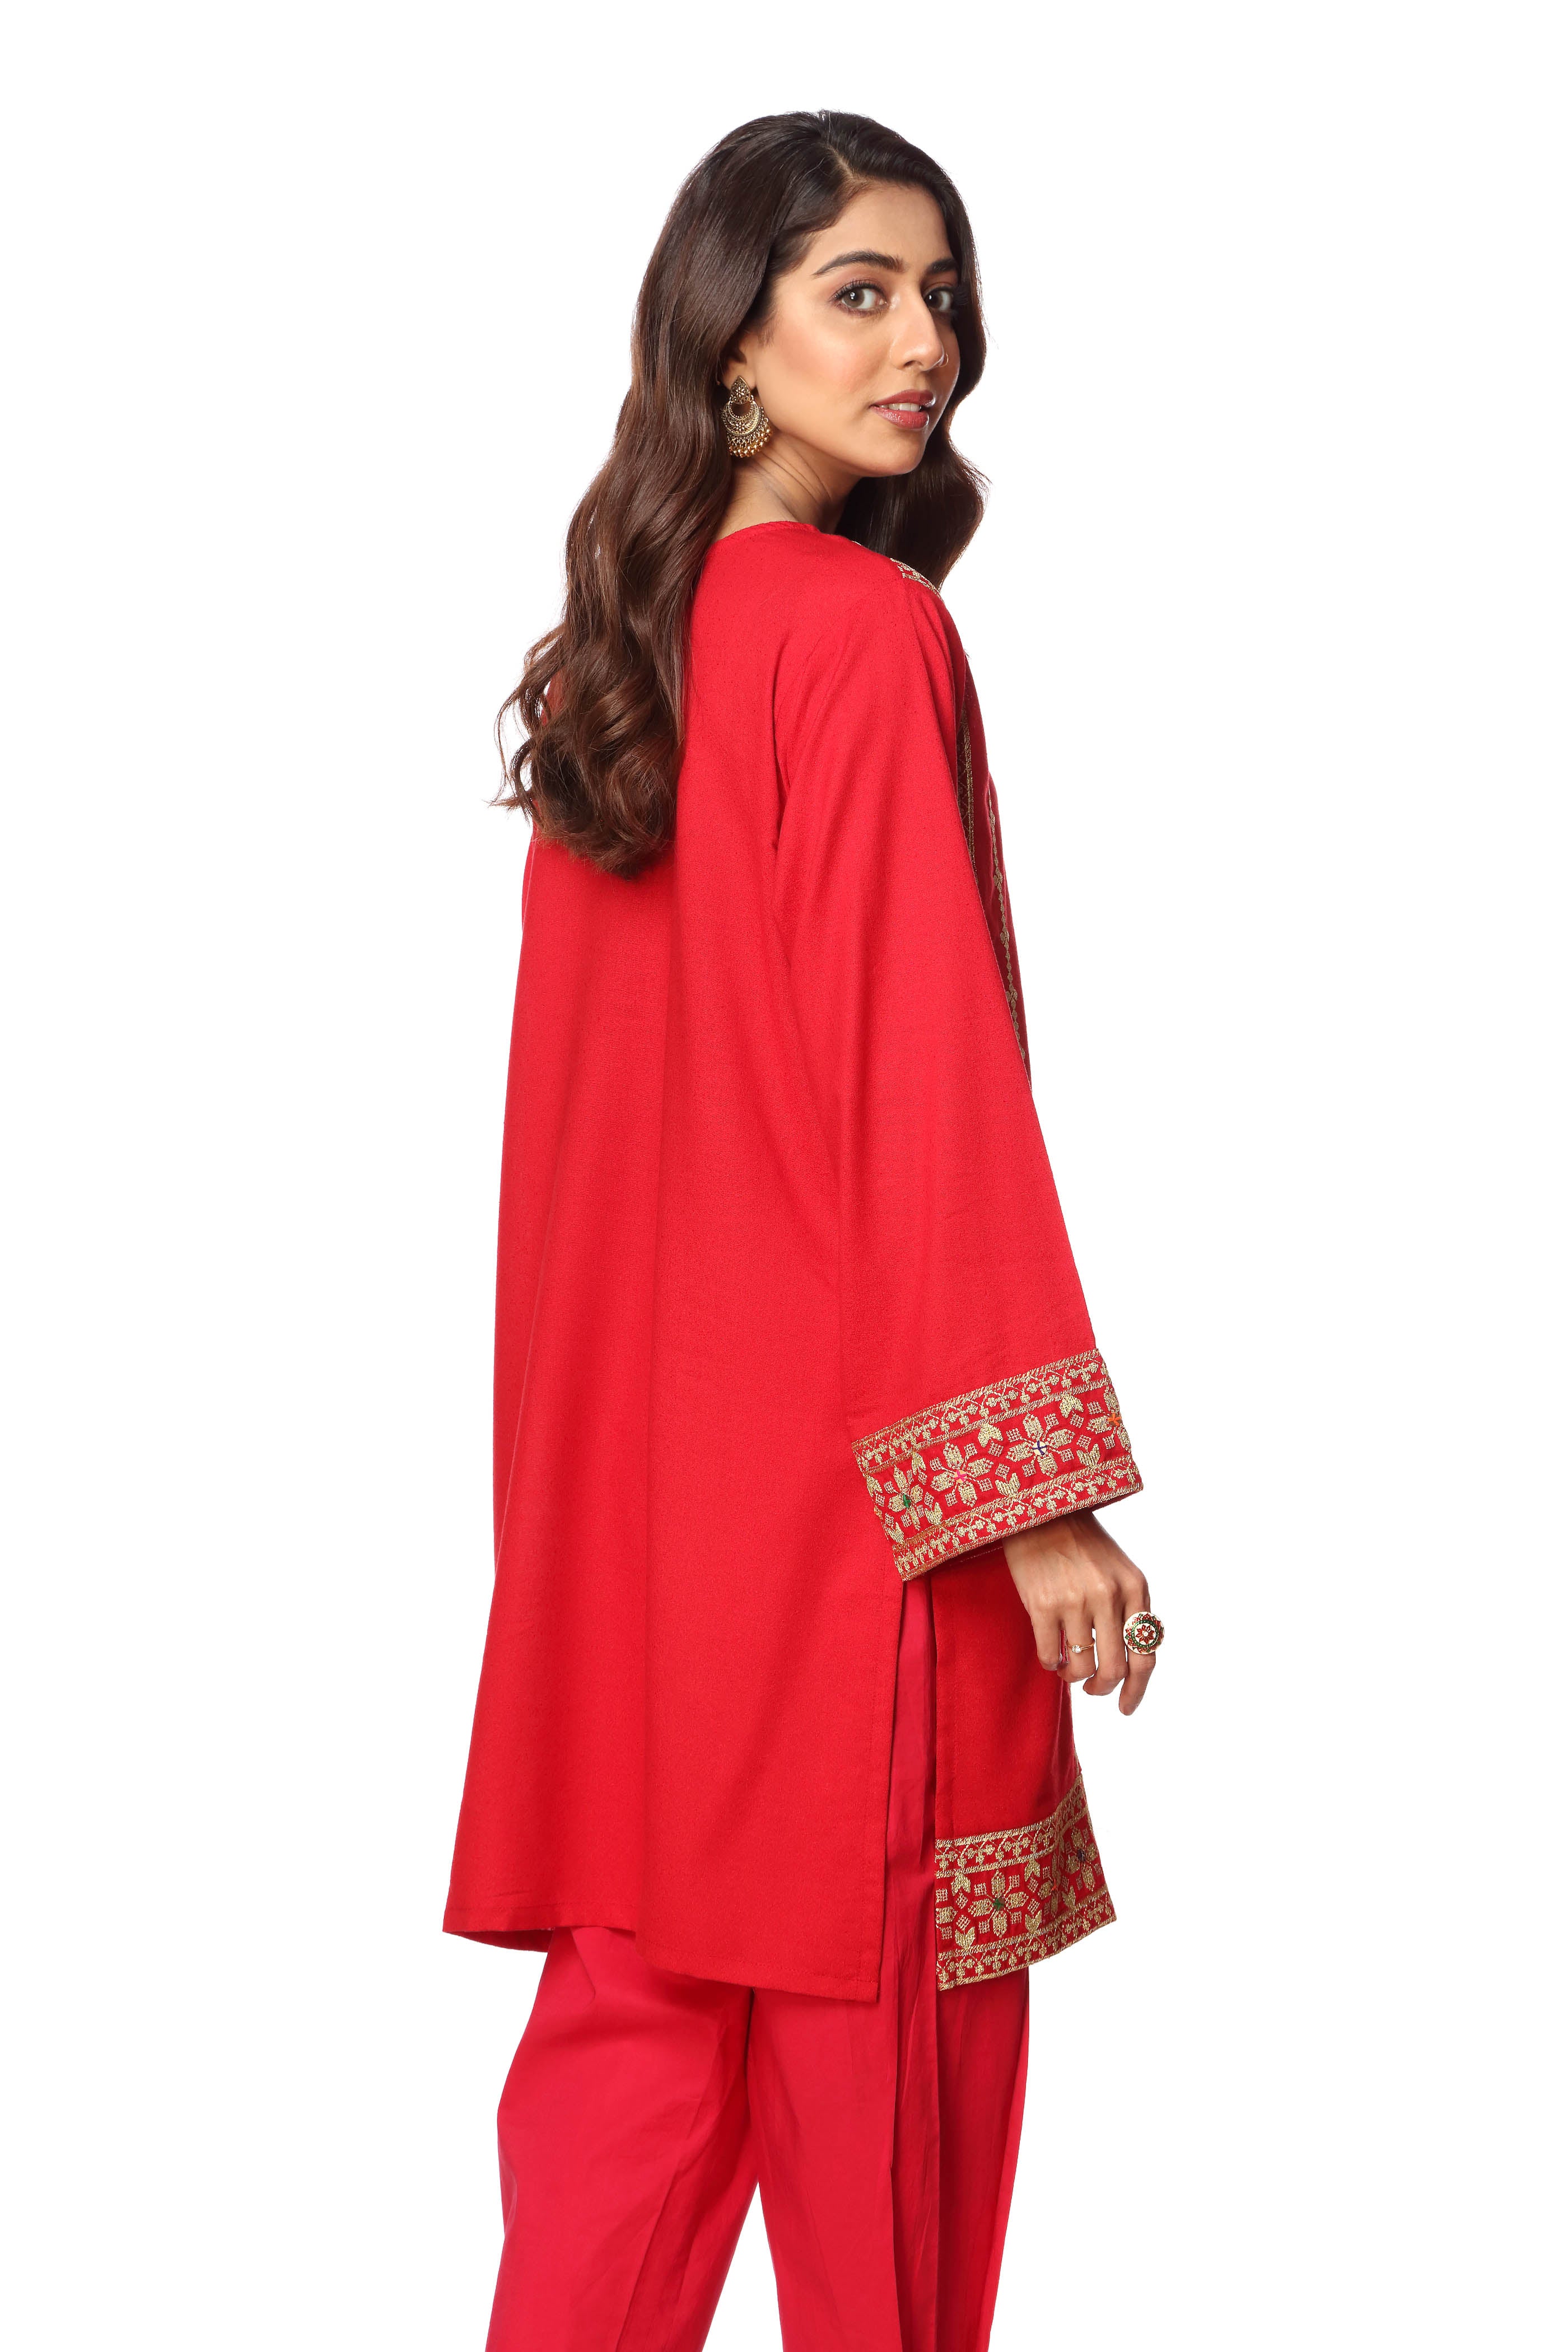 Ethnic Gold Sl in Red coloured Printed Lawn fabric 3